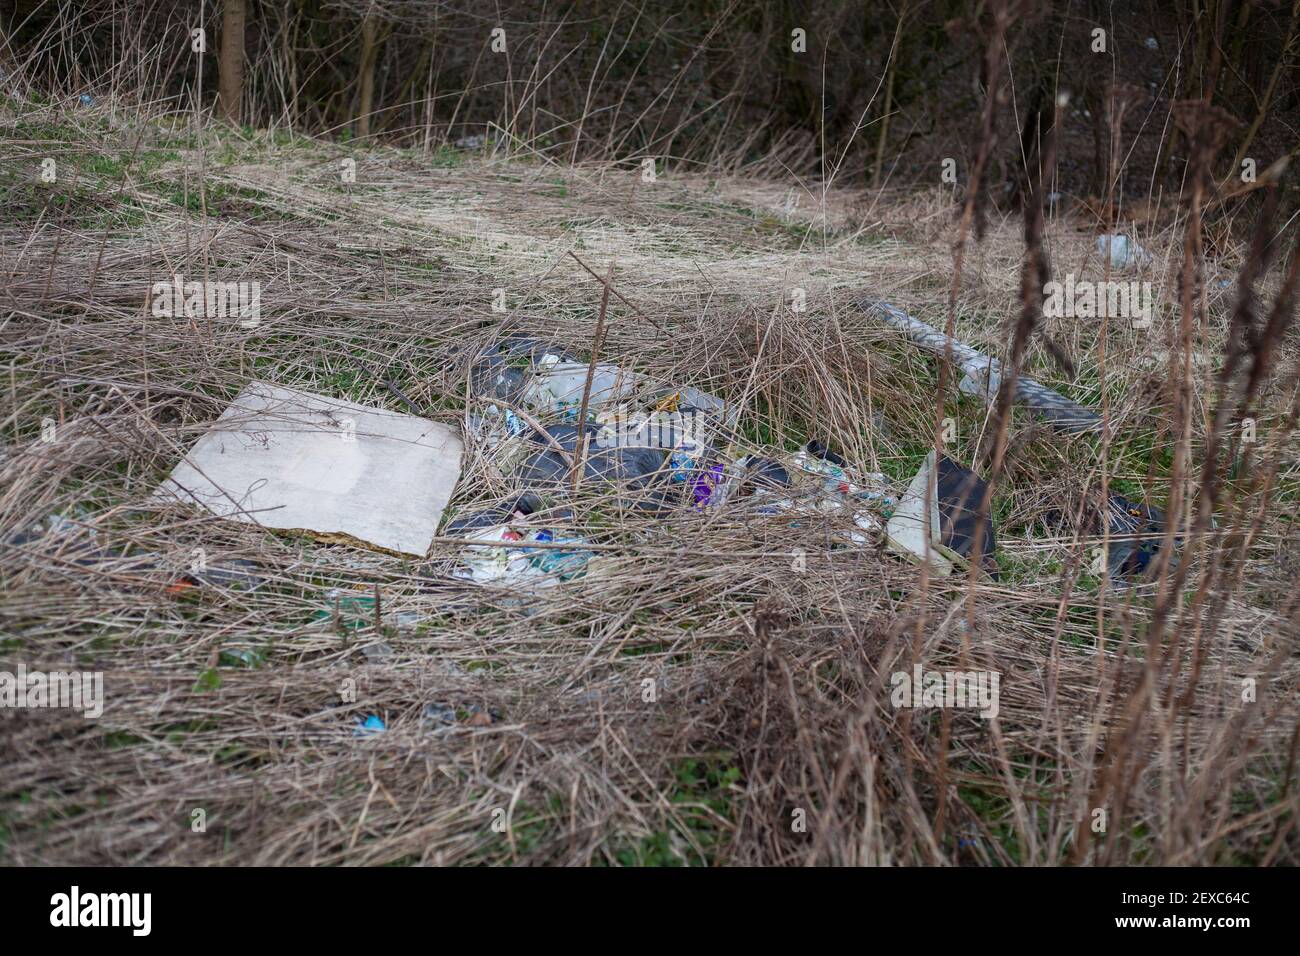 Fly tipped rubbish and household waste illegally dumped on the edge of local woodland.A common sight in more deprived areas of the UK. Stock Photo